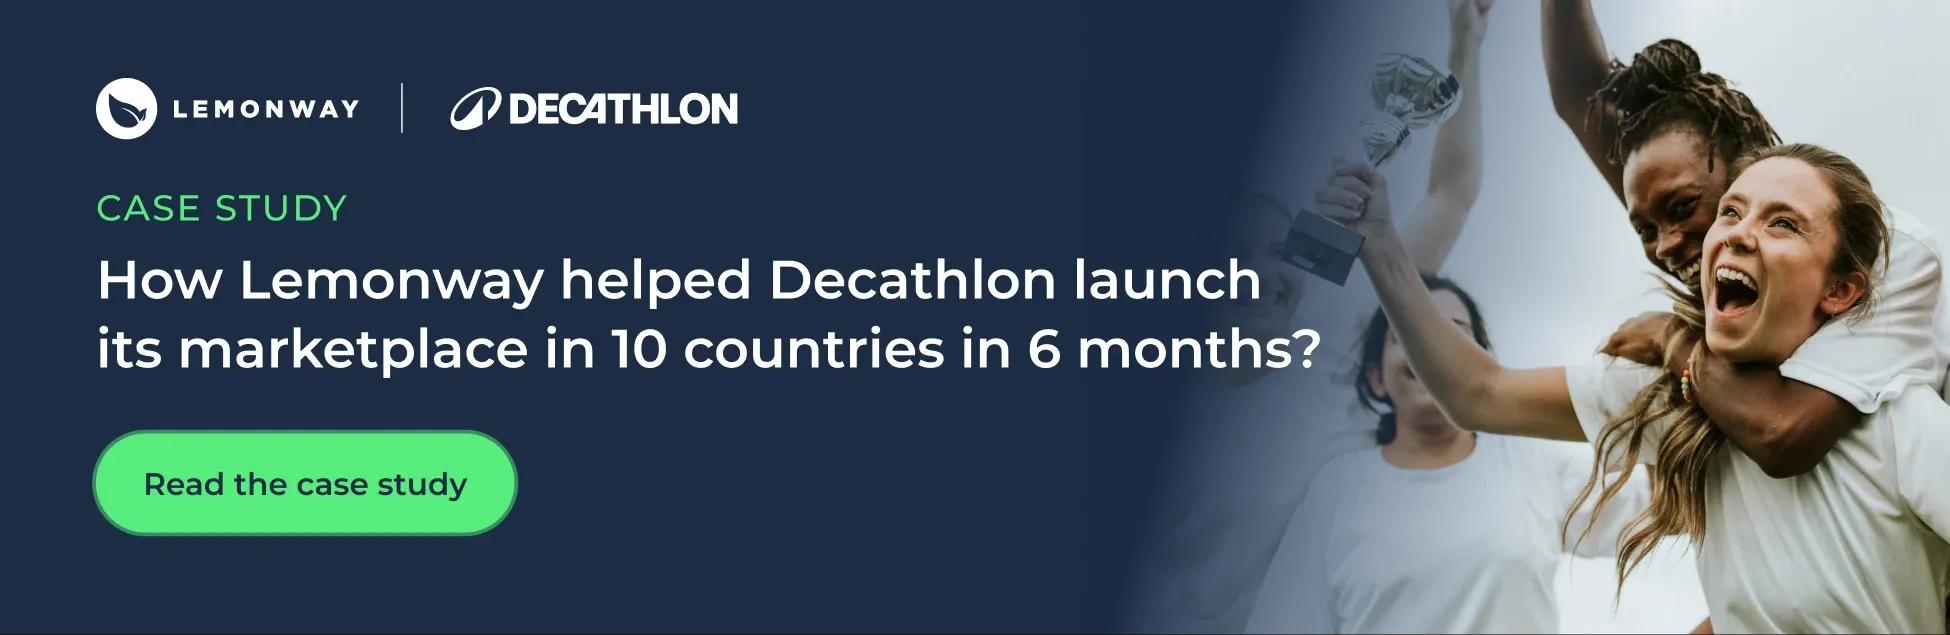 Case study: How Lemonway helped Decathlon launch its marketplace in 10 countries in 6 months?